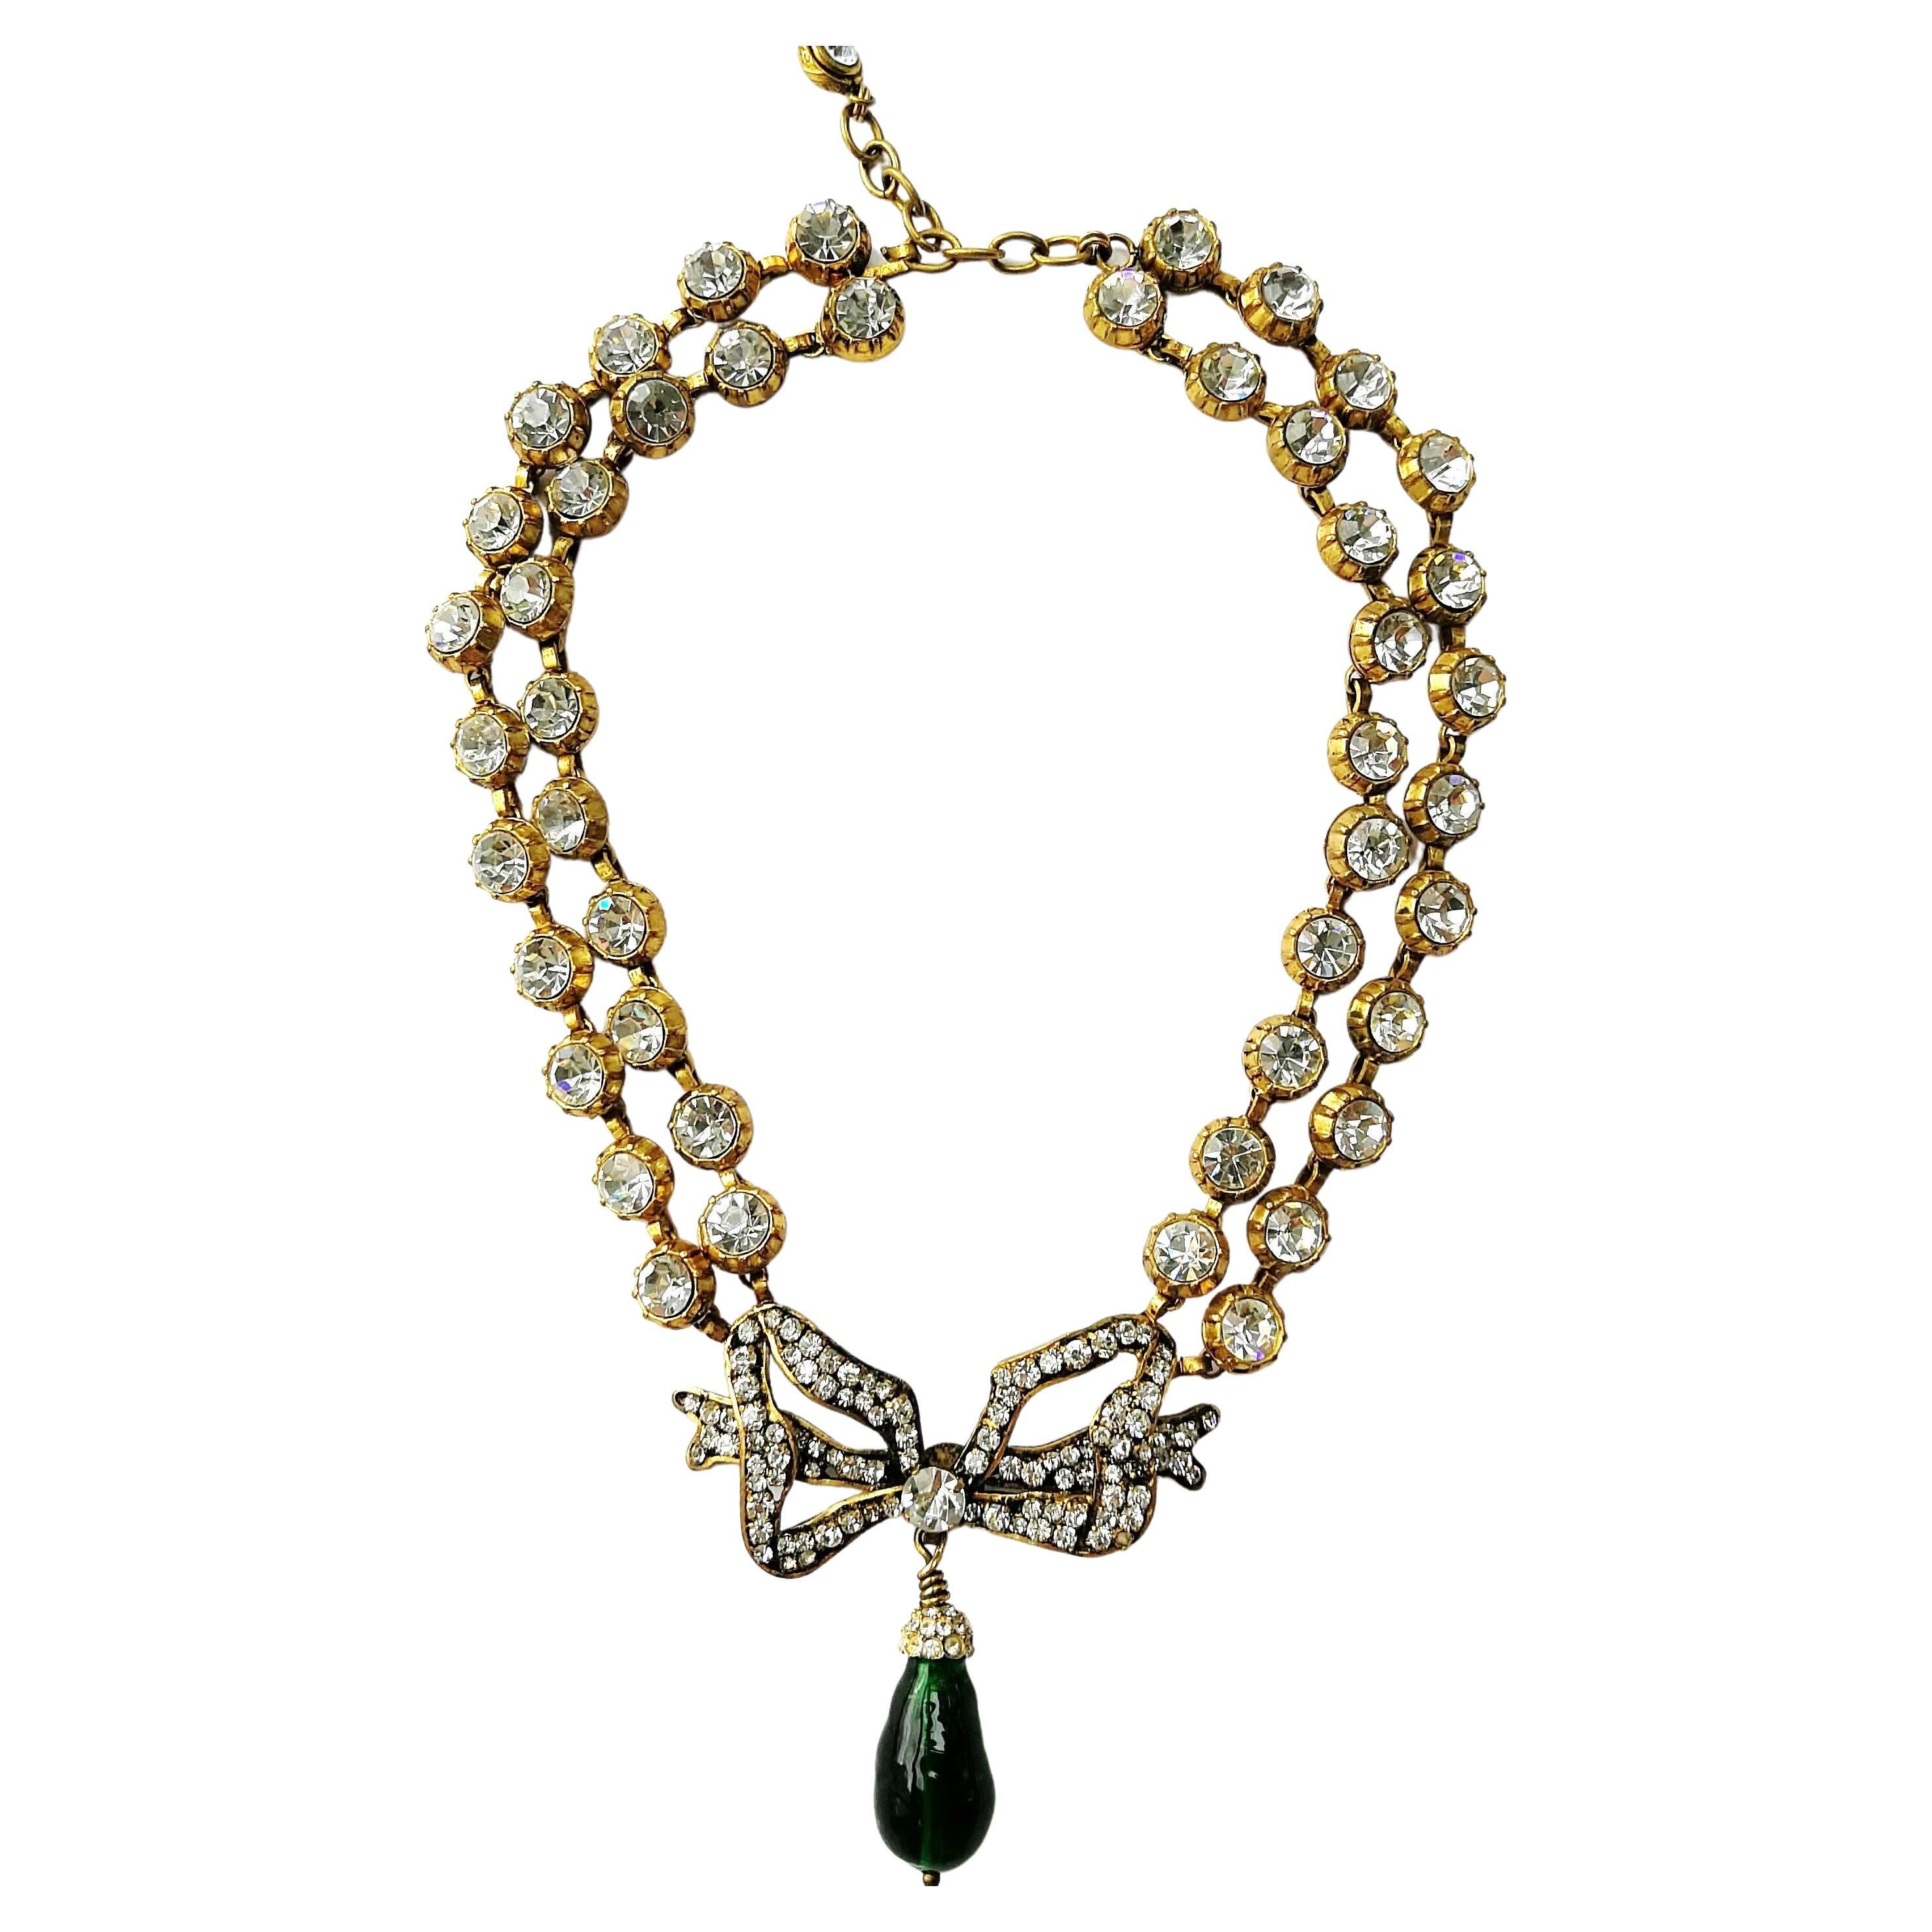 A large clear paste, emerald poured glass 'bow' necklace, Chanel, France, 1980s